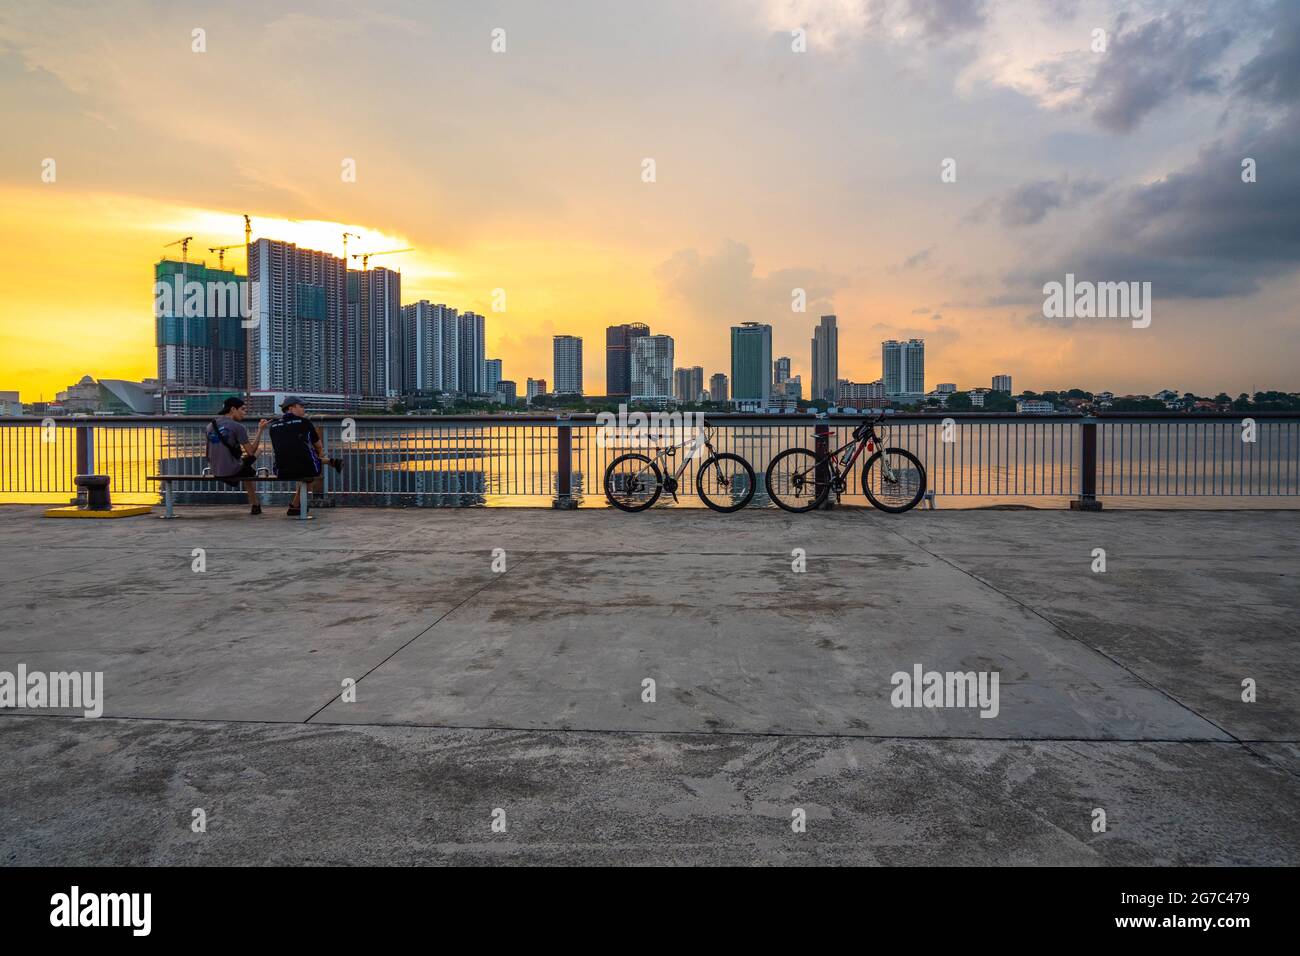 Cyclists taking a break at Woodlands Waterfront Park, a coastal park in central Singapore. Stock Photo